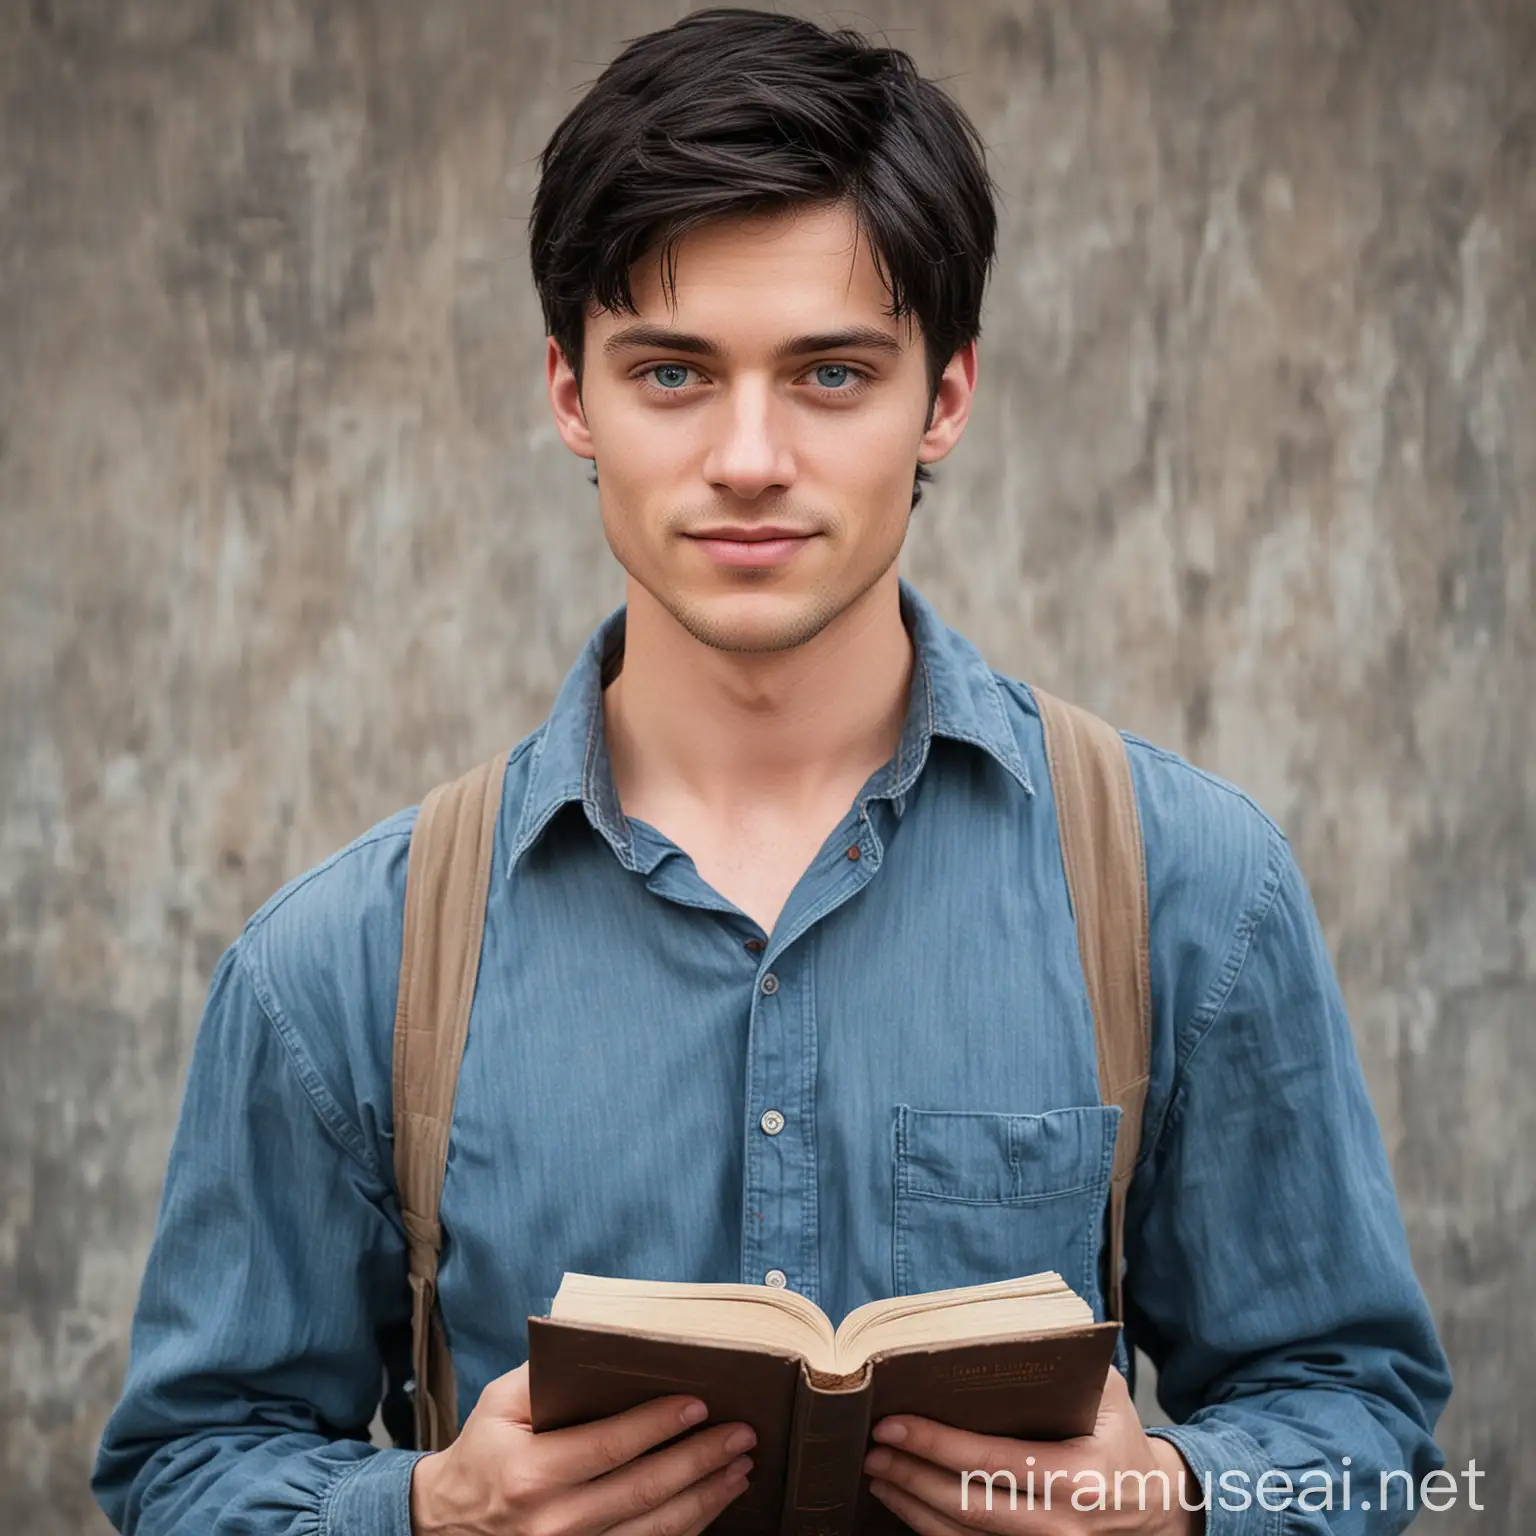 Southern Law Student Reading Book in Shabby Attire